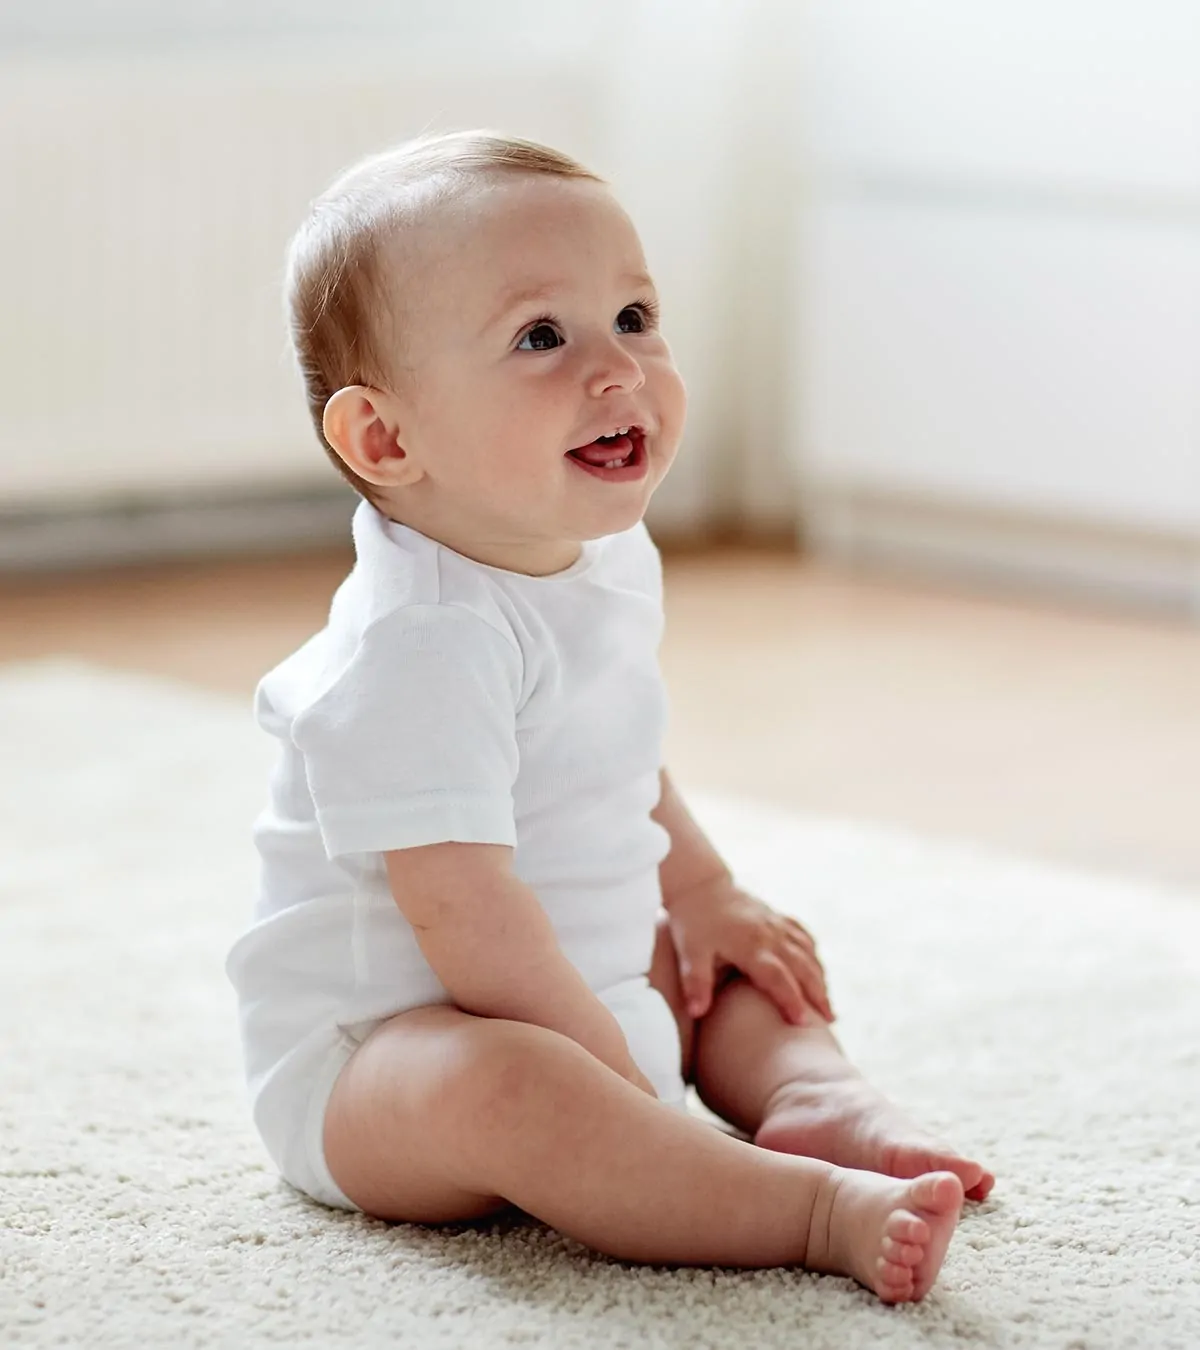 When Do Babies Sit Up On Their Own And How To Encourage Them